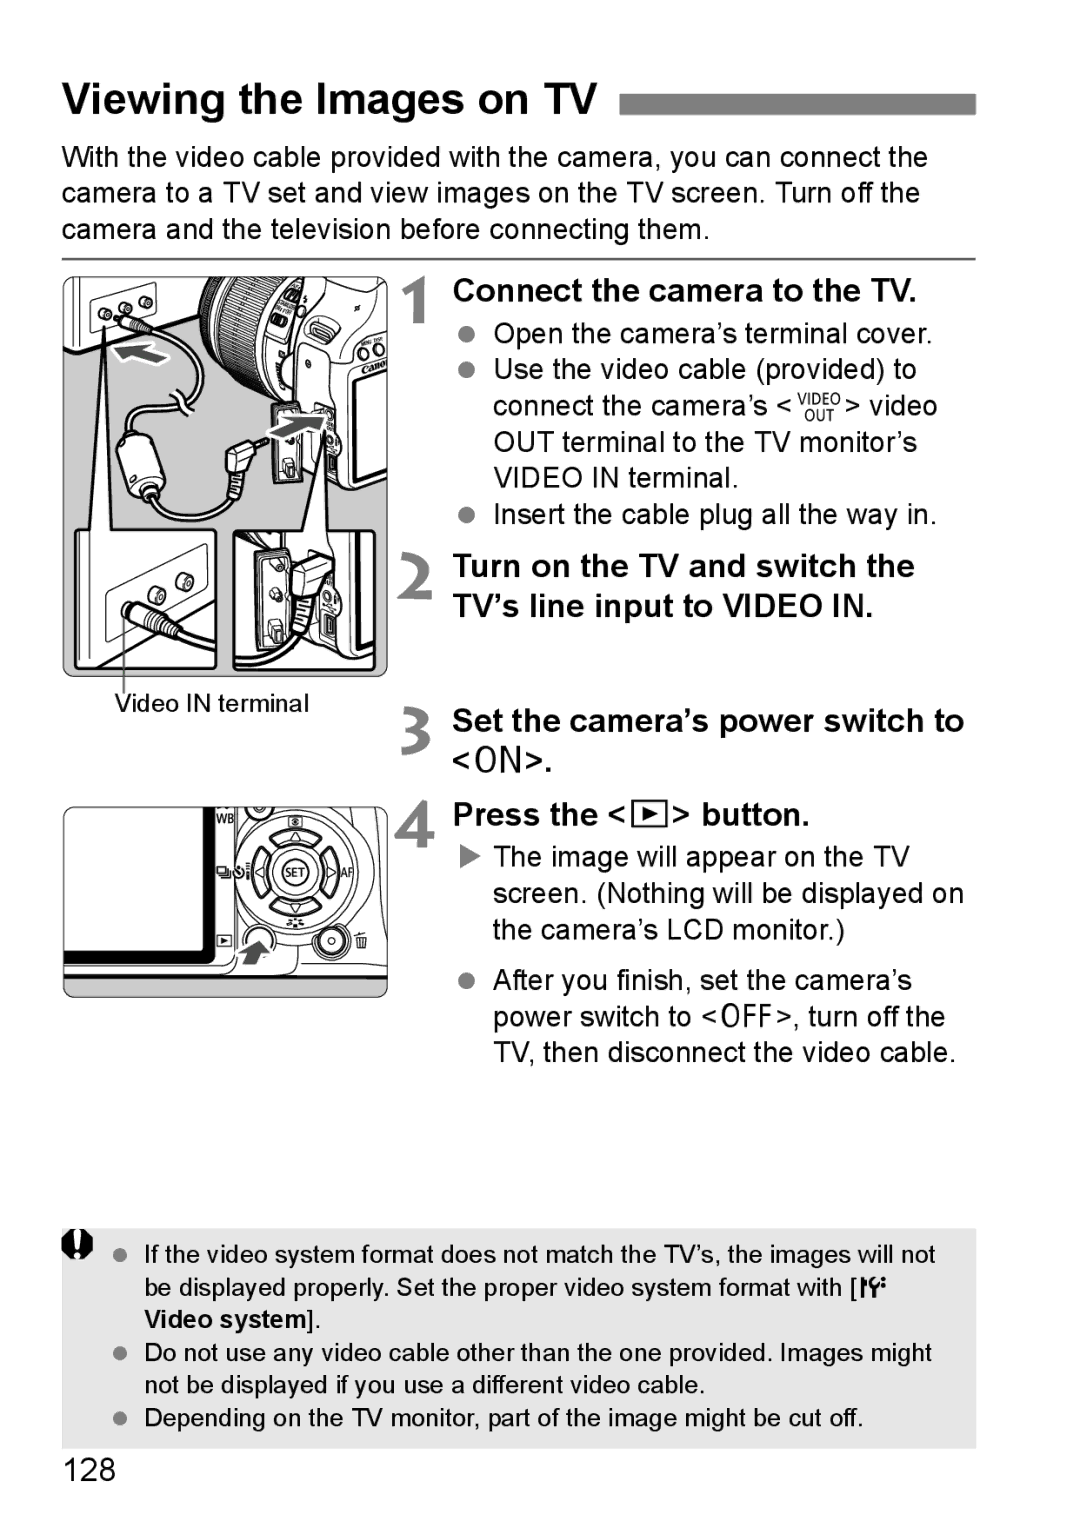 Canon EOS 450D instruction manual Viewing the Images on TV, Connect the camera to the TV, 128 